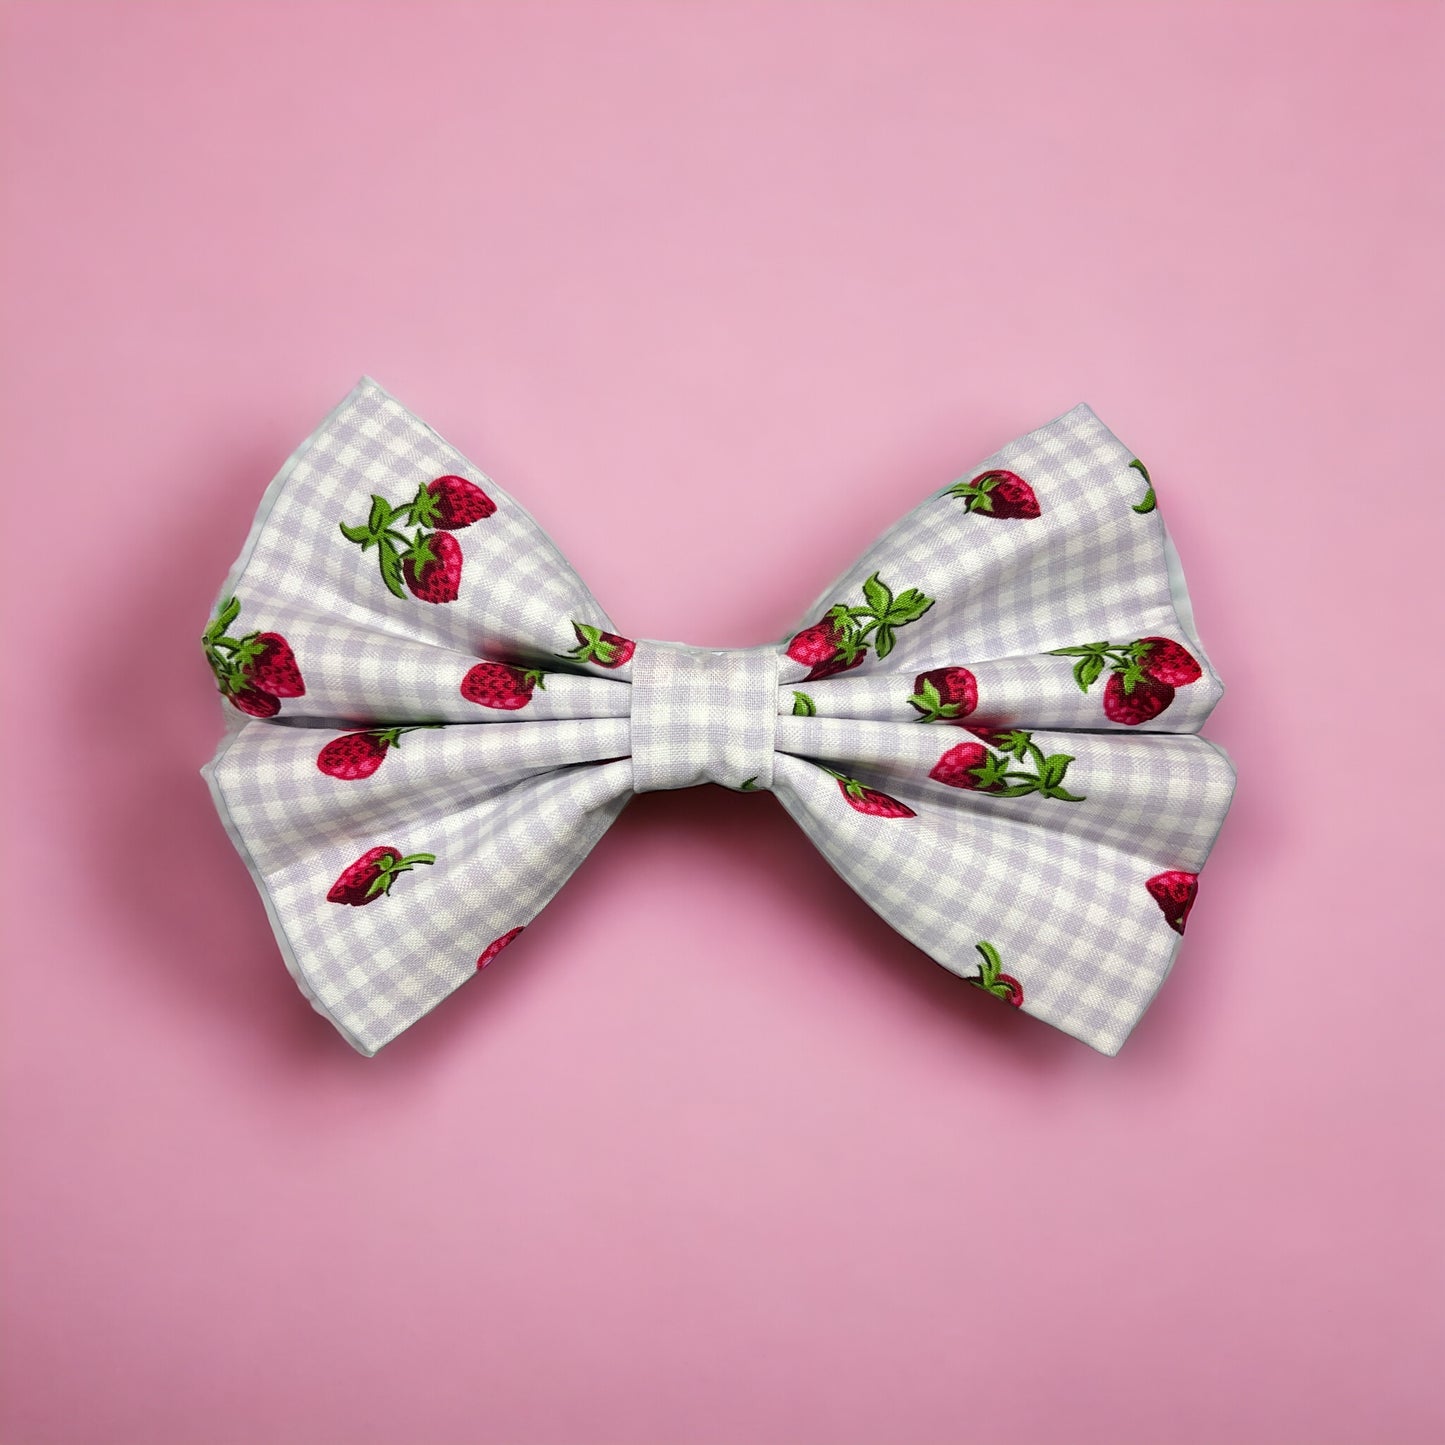 Straberry Plaid Bow Tie | Slip-On Bow Ties